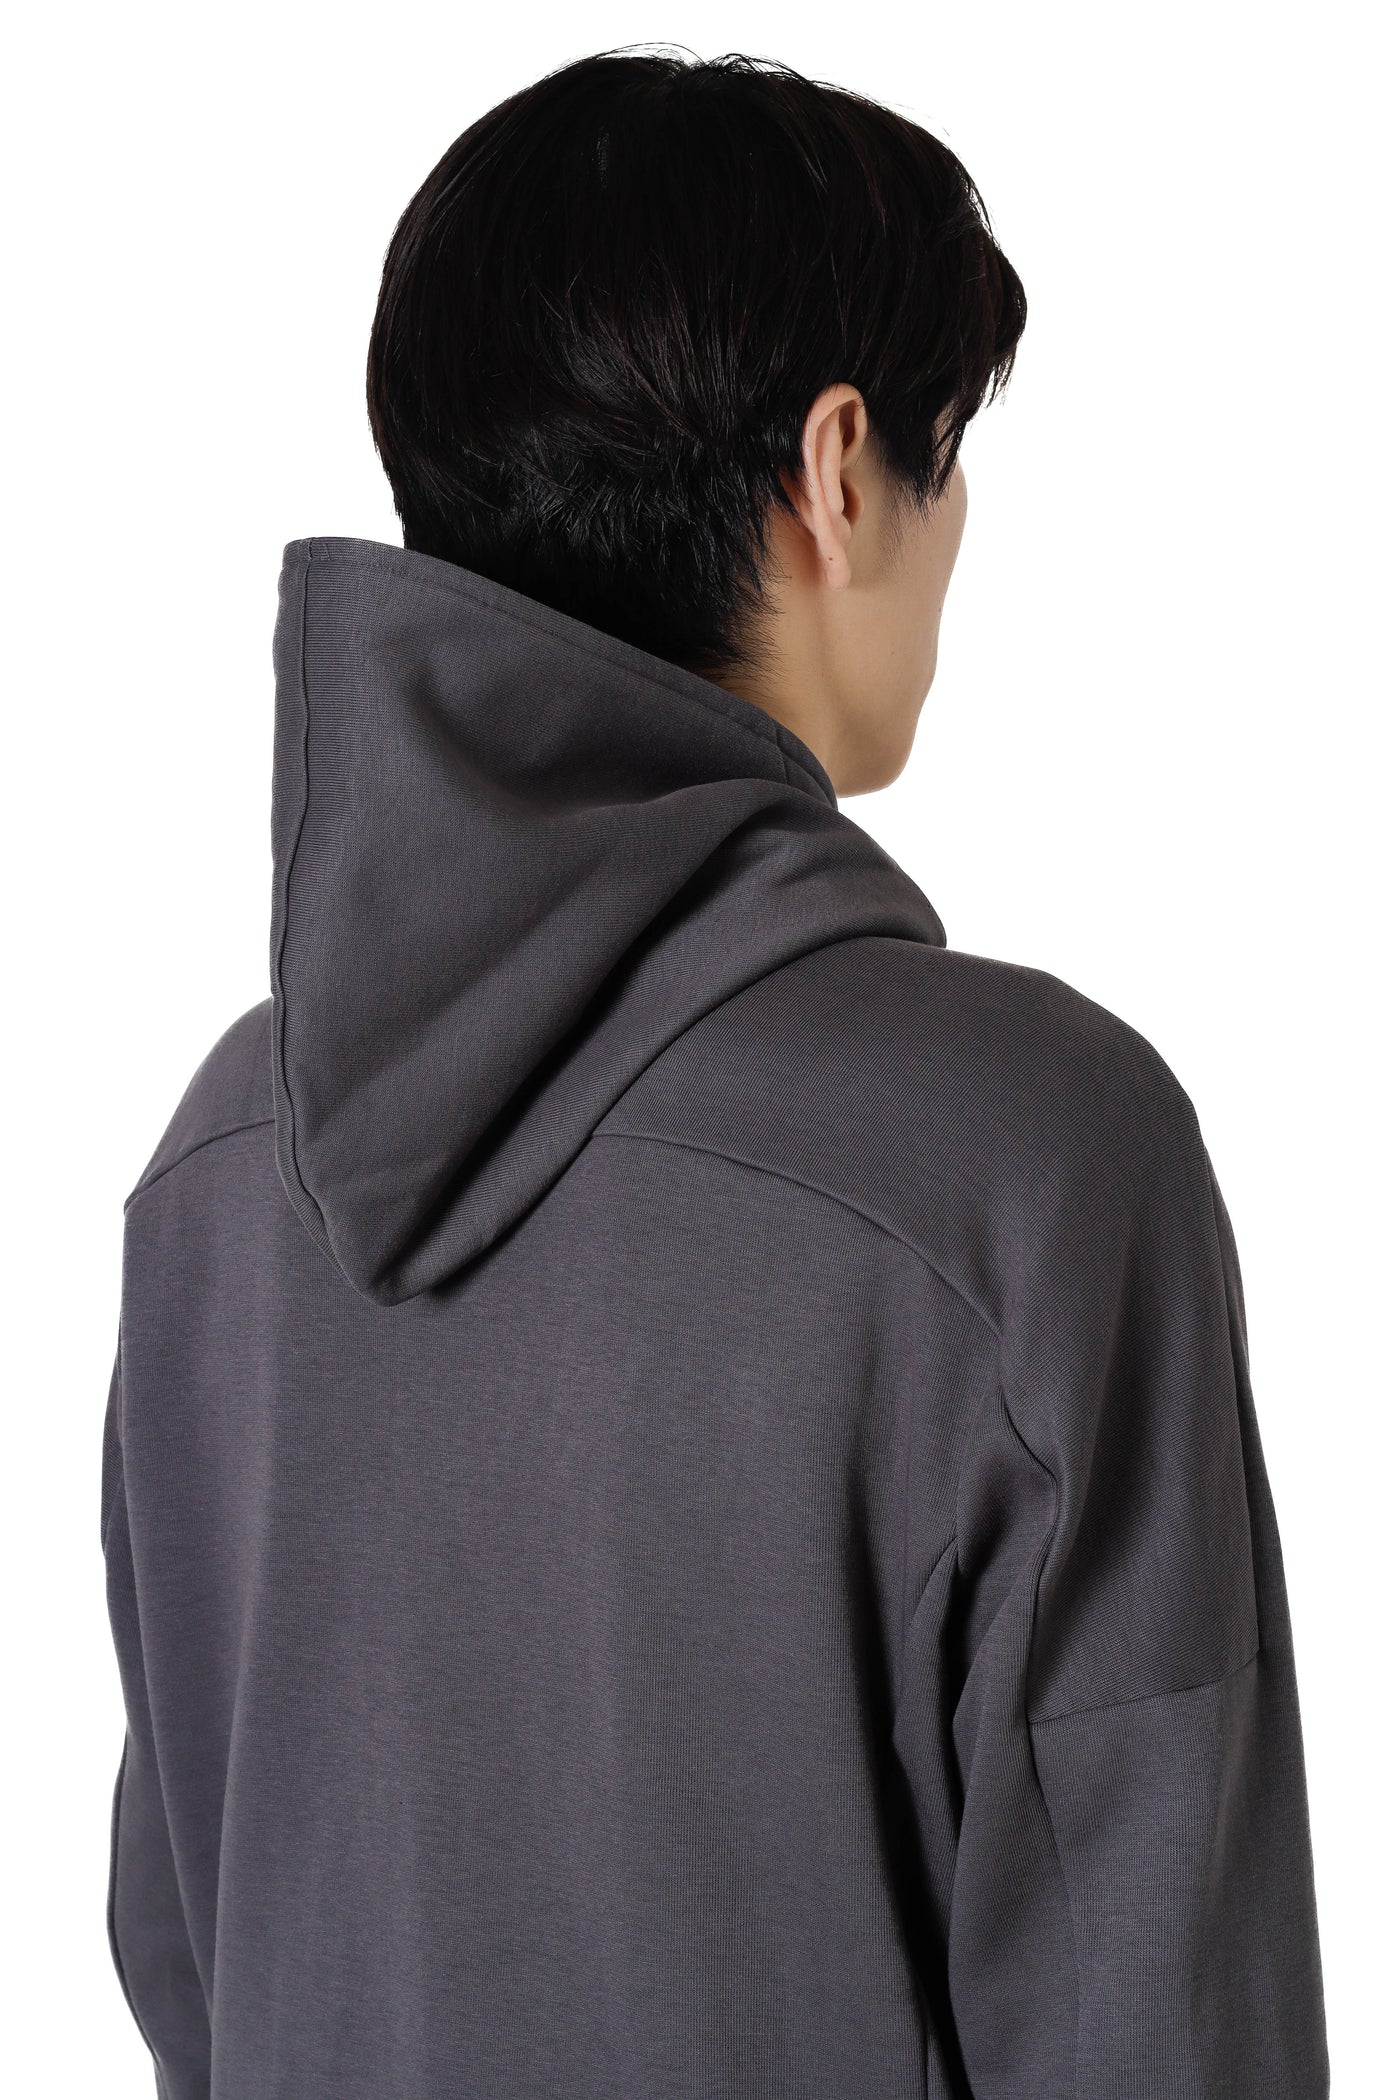 Limited product AJ32-036 Cotton/polyester cardboard knit zip-up hoodie